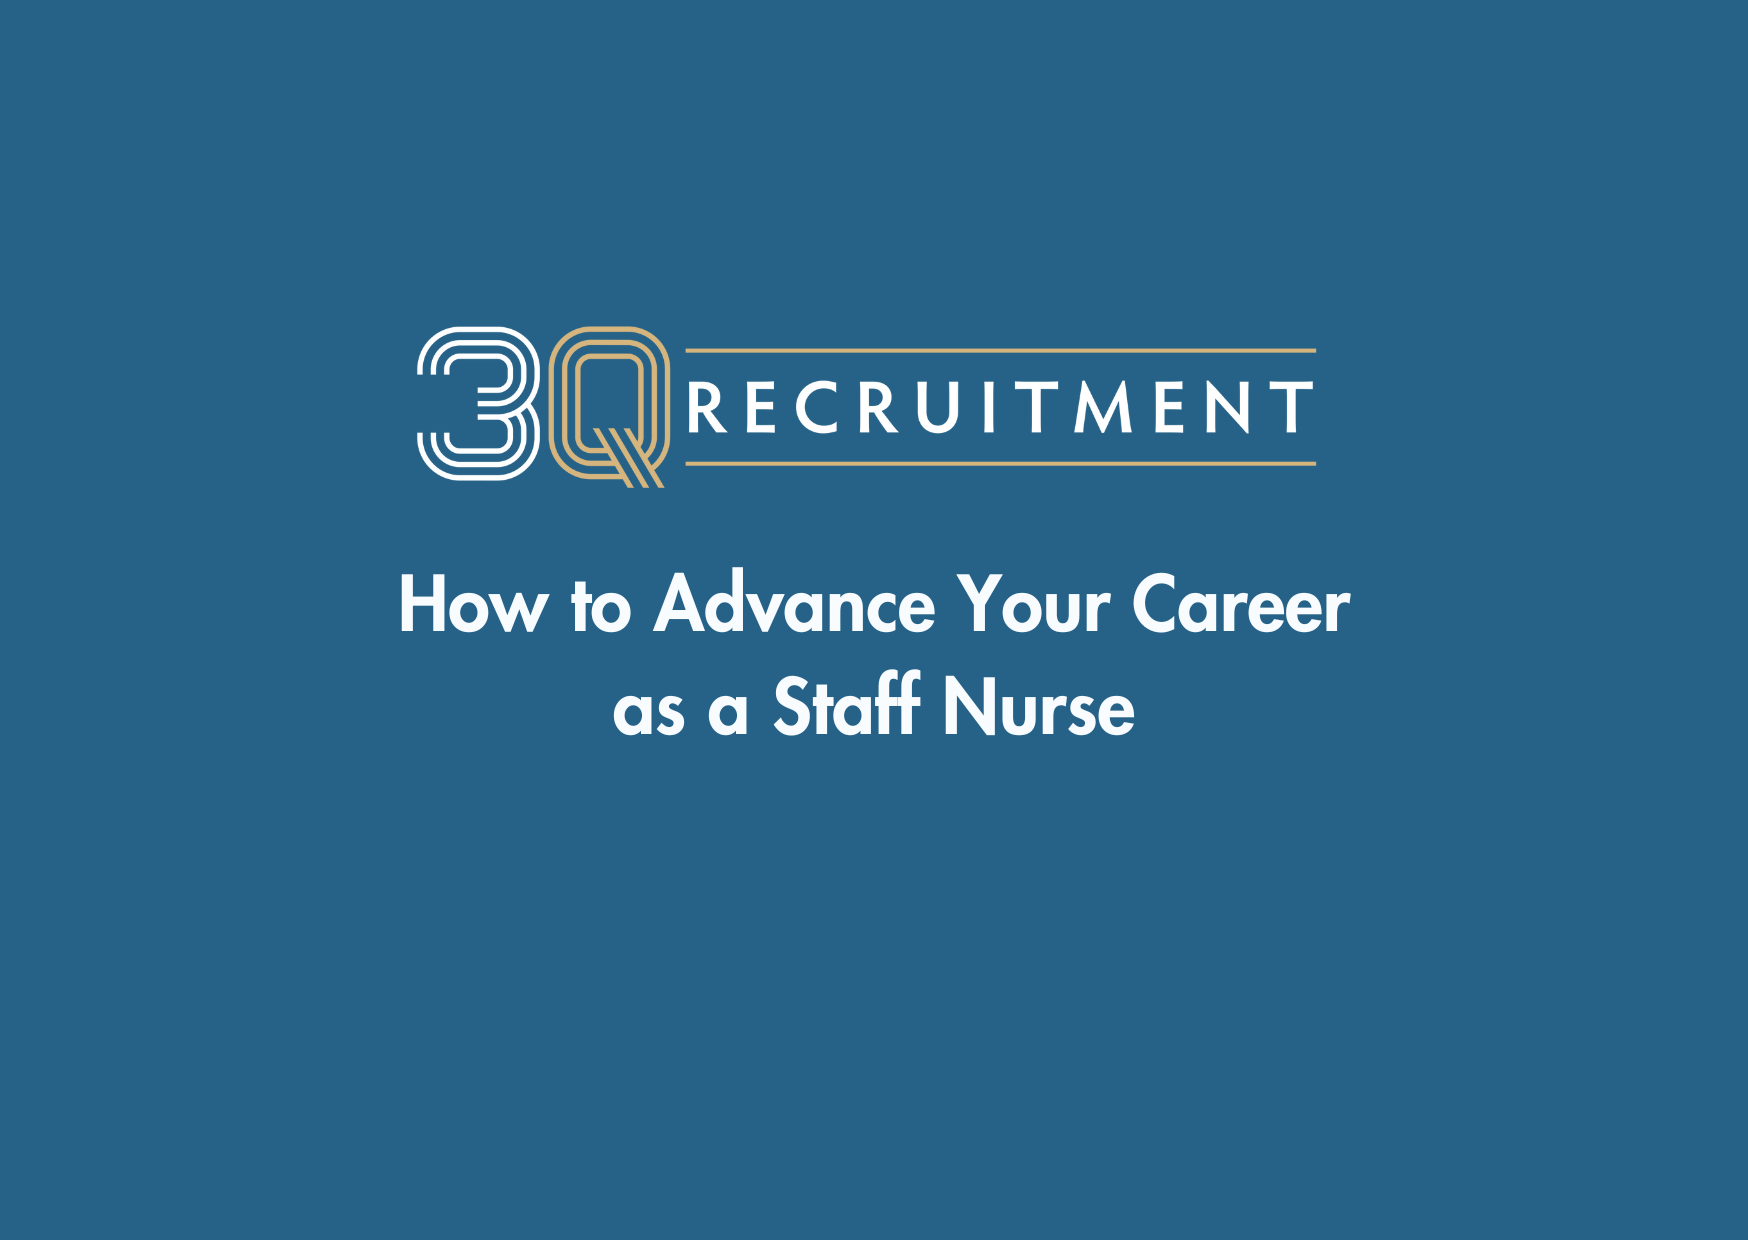 3Q Recruitment How to Advance Your Career as a Staff Nurse